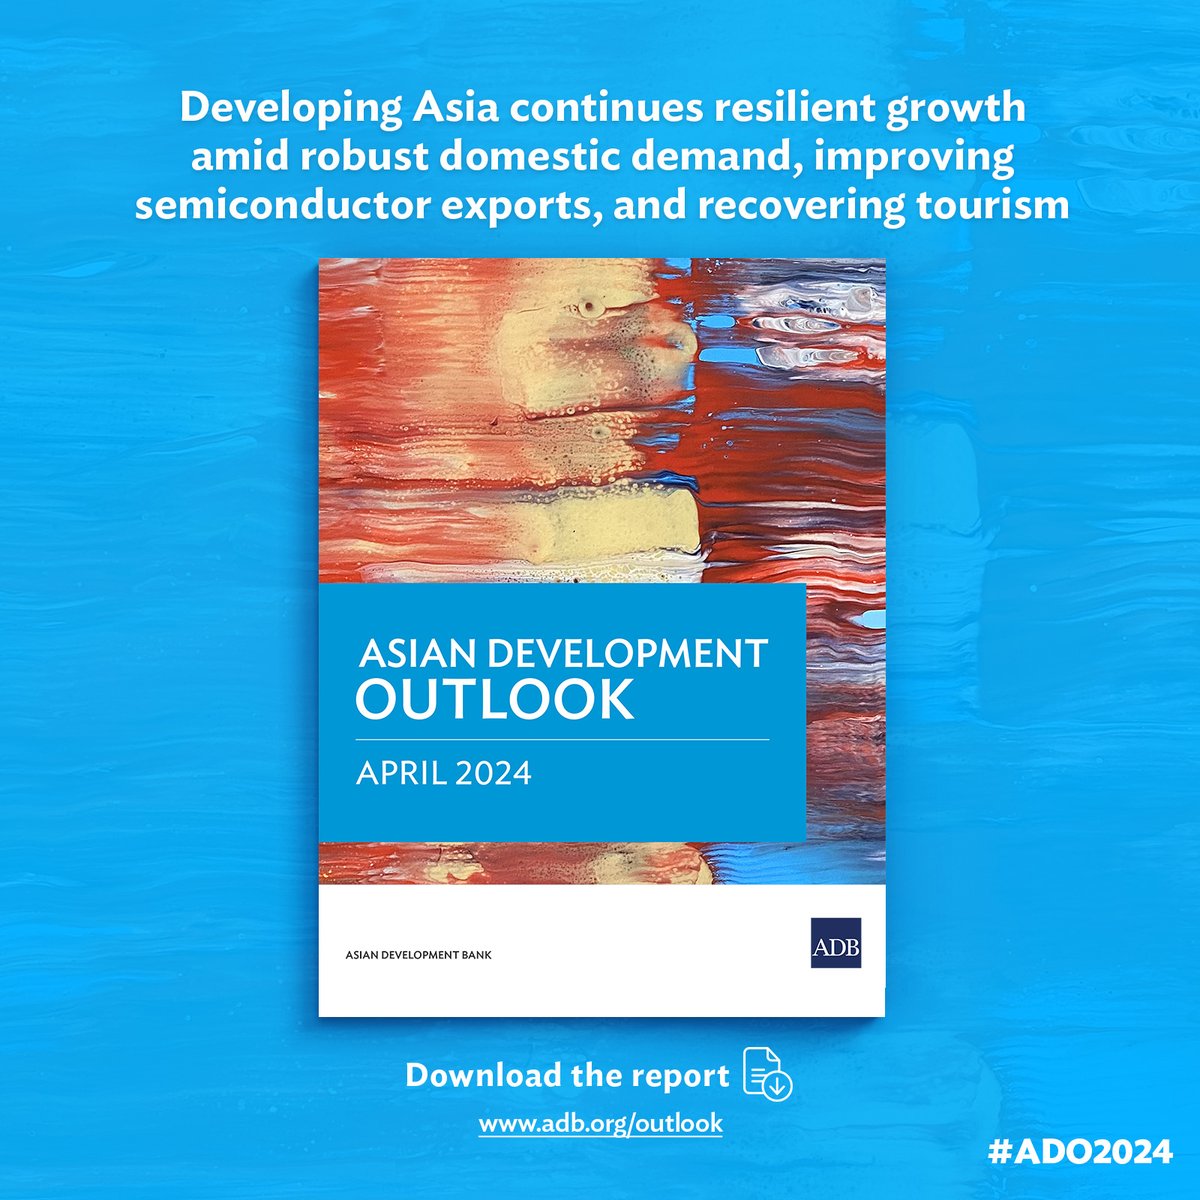 ADB’s Asian Development Outlook 2024 is out. Download our latest economic data and analysis on developing economies in Asia and the Pacific. #ADO2024 🔗 adb.org/outlook/editio…